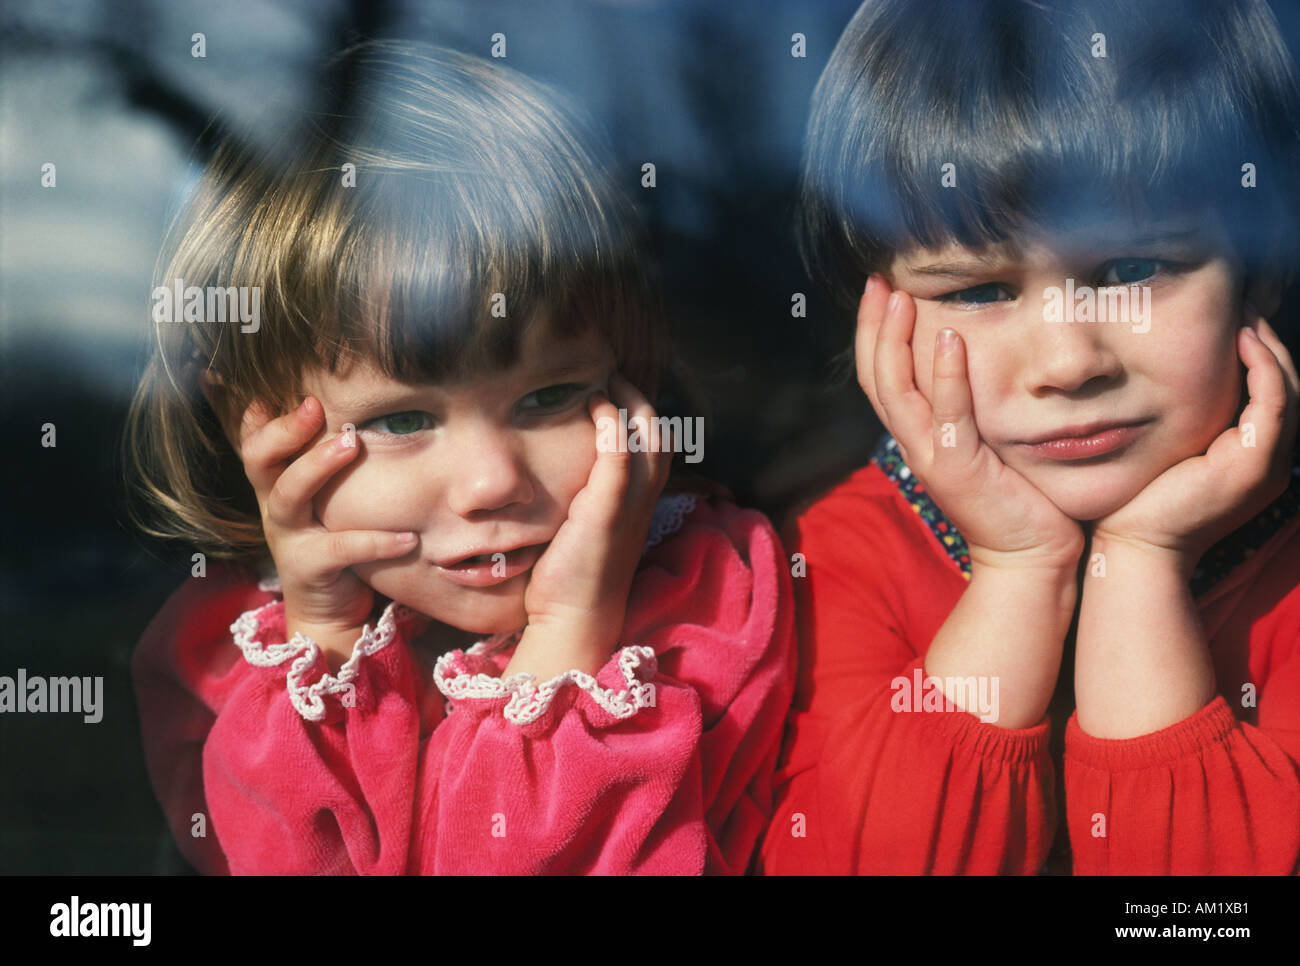 Two young girls looking out the window in dismay Stock Photo